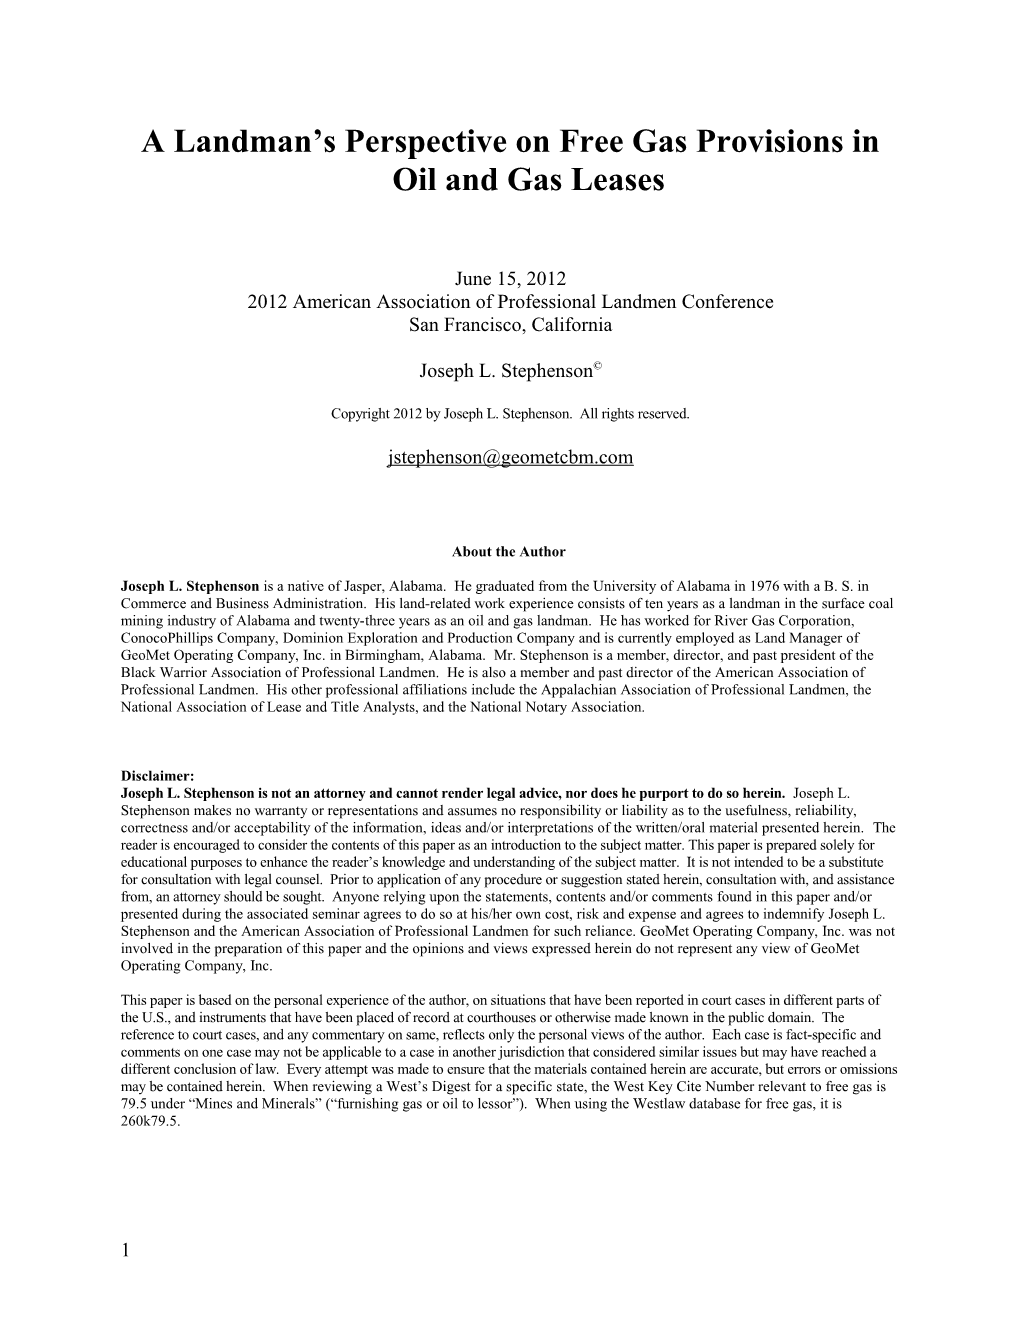 A Landman S Perspective on Free Gas Provisions in Oil and Gas Leases